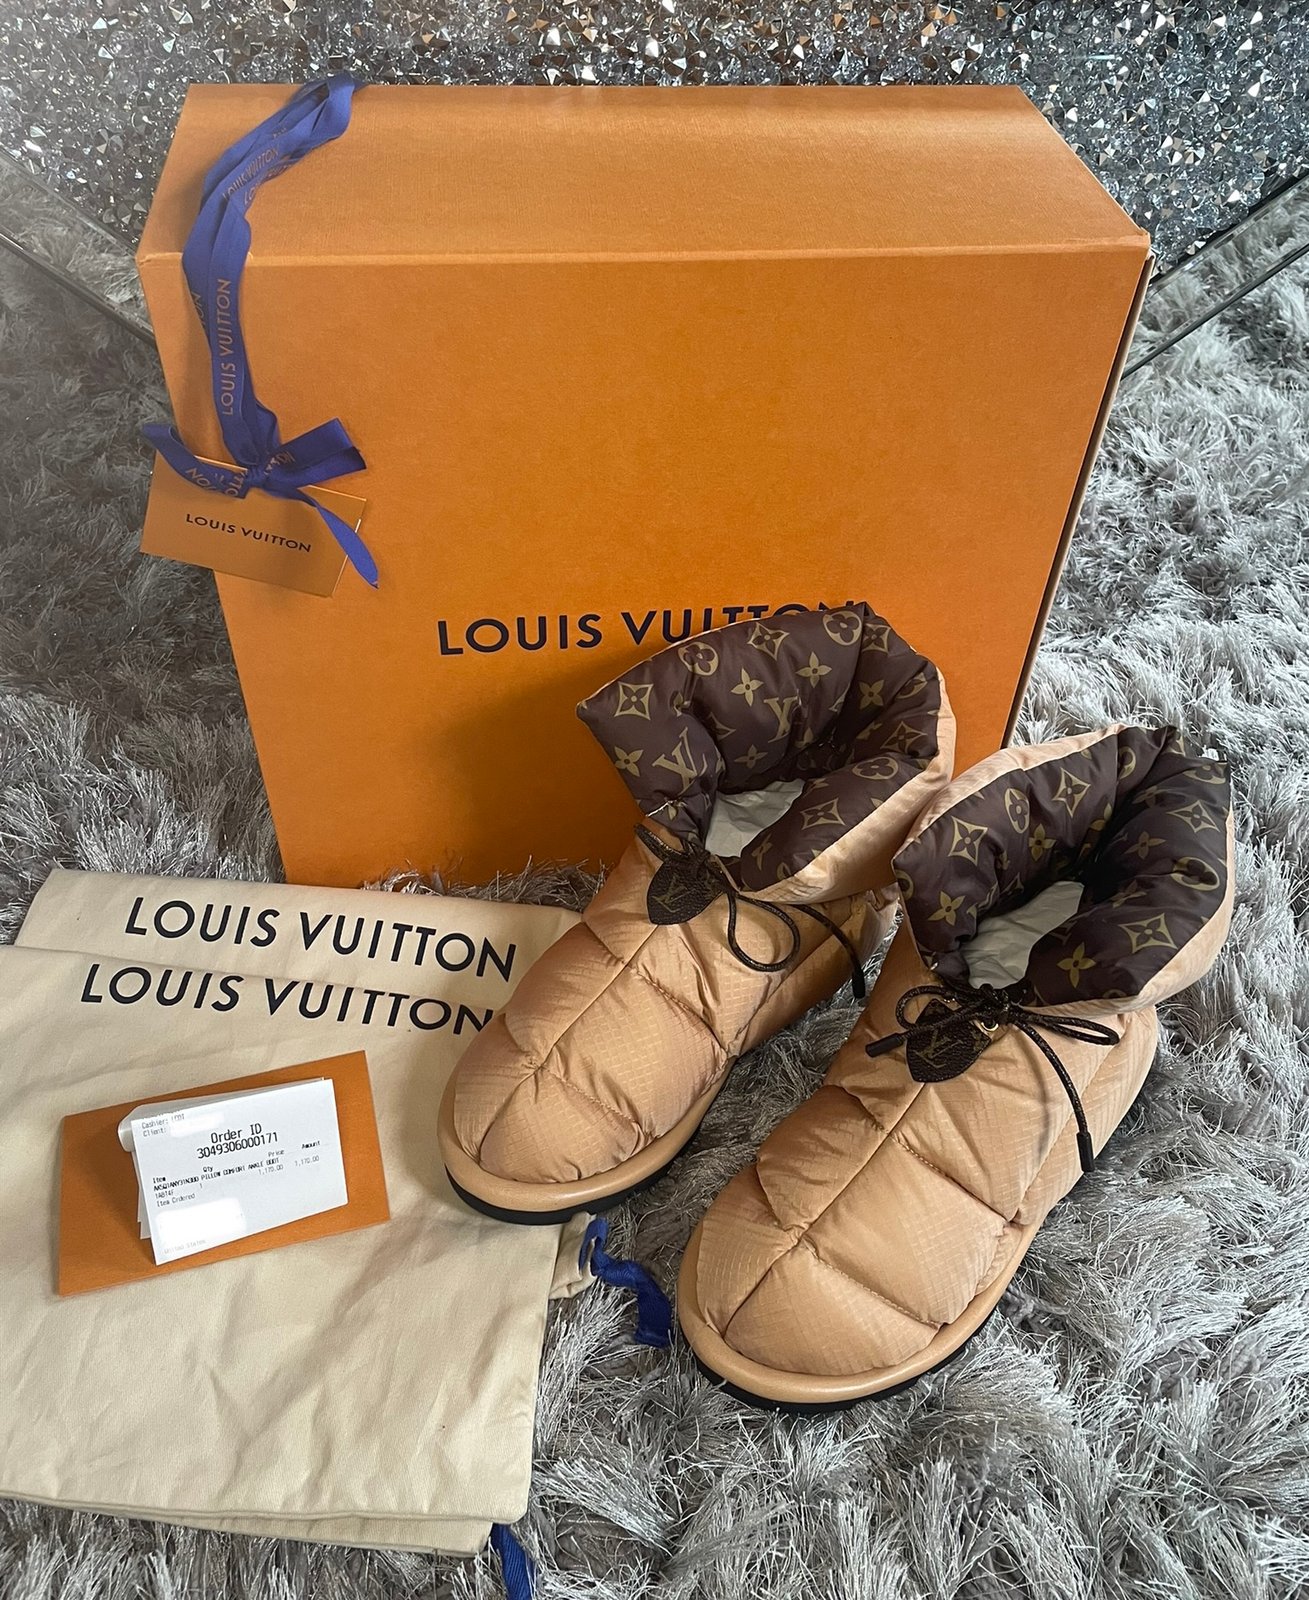 Louis Vuitton Pillow Ankle Comfort Boot LIMITED EDITION Sz 38 New With Box   eBay